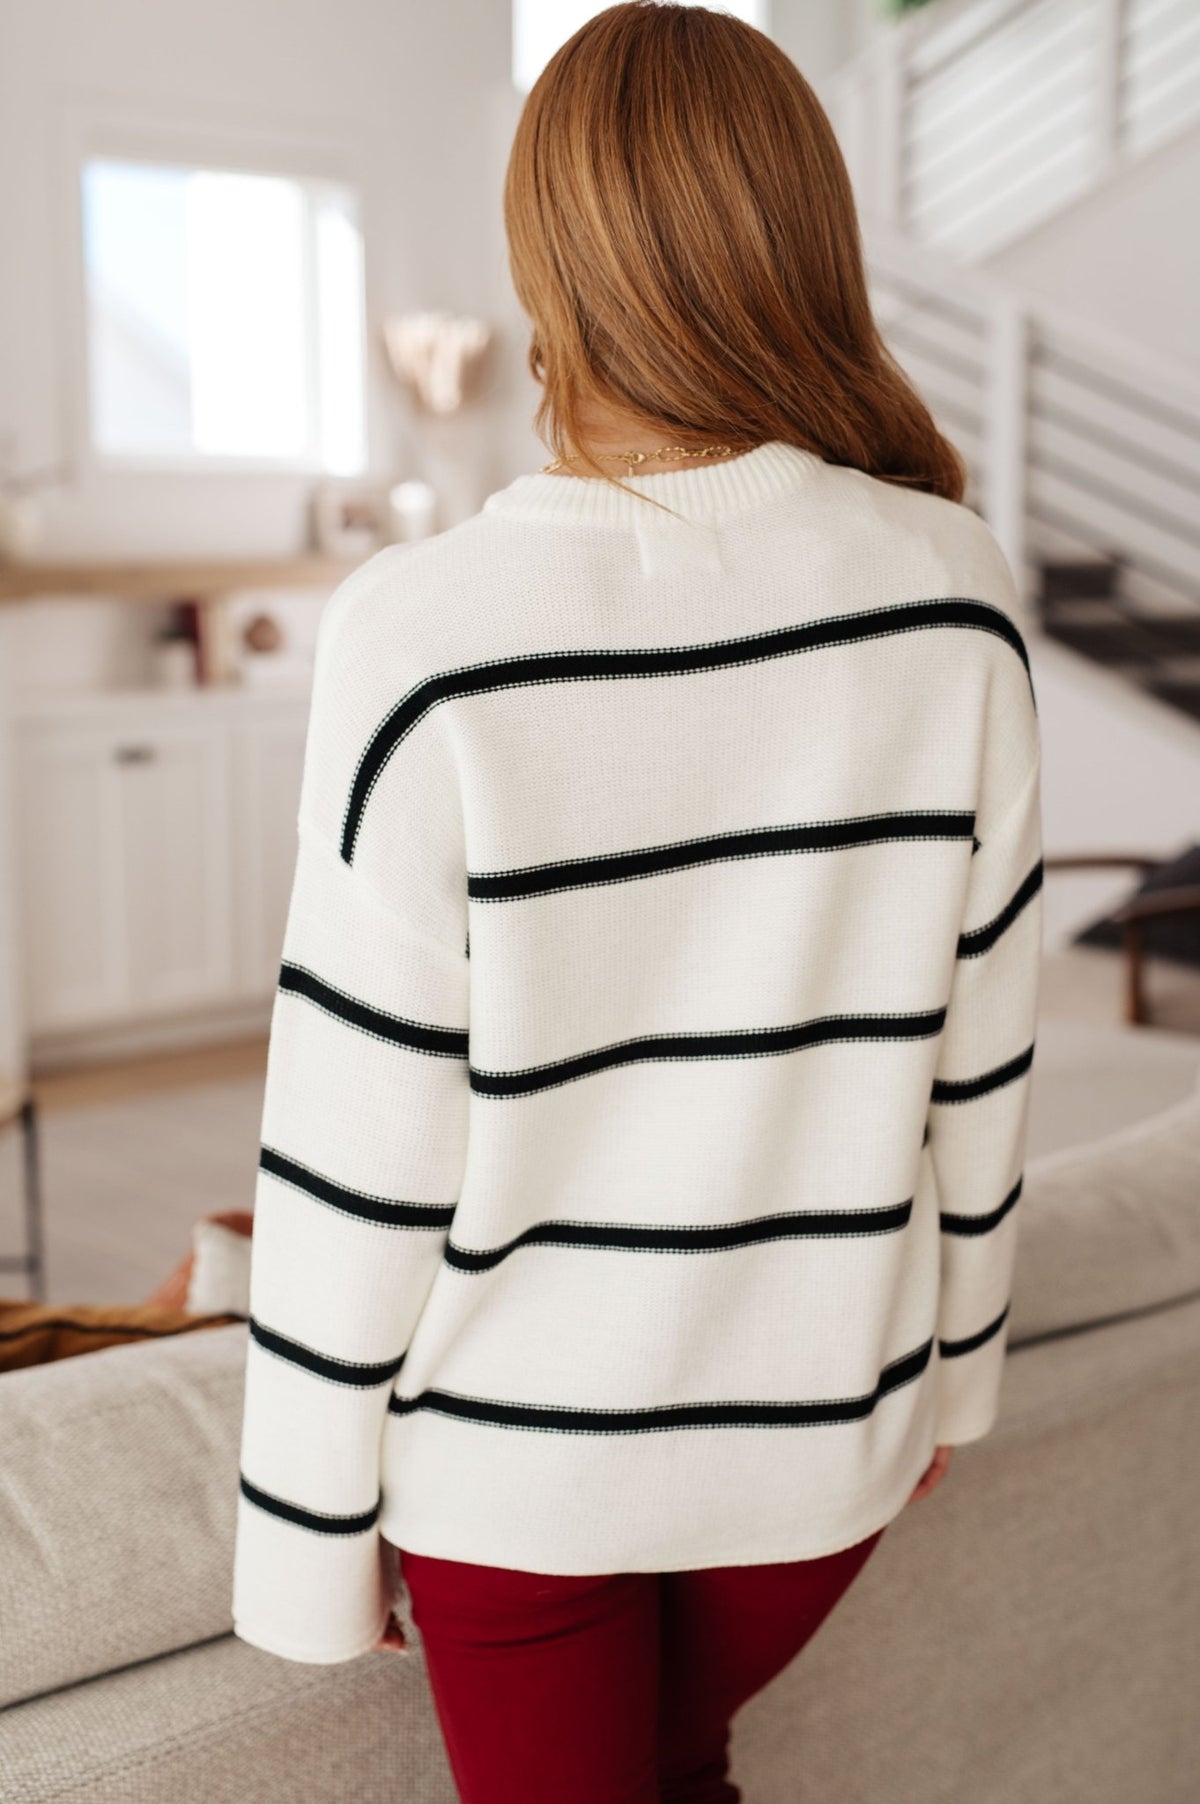 More or Less Striped Sweater - Happily Ever Atchison Shop Co.